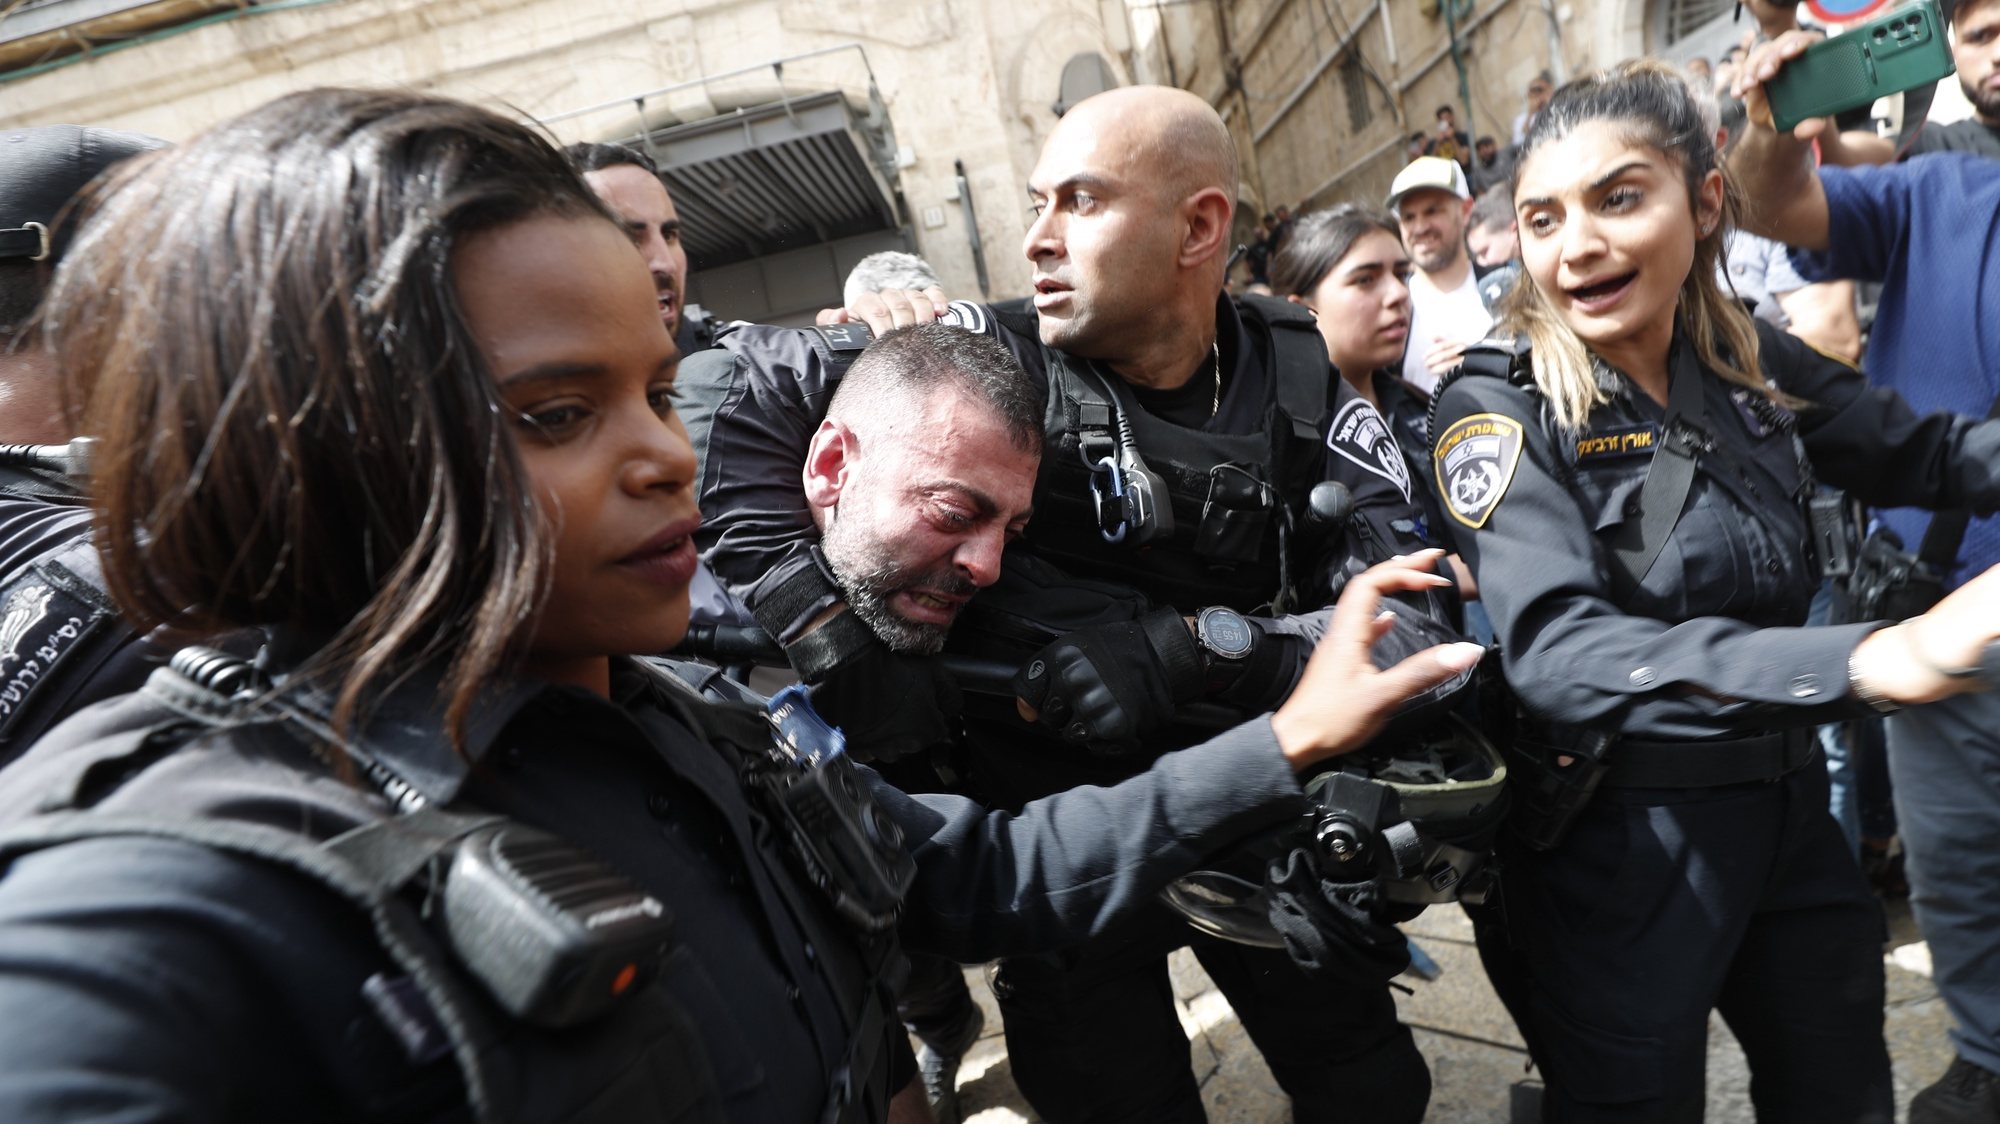 epa09944493 Israeli police arrest a man during a procession for slain American-Palestinian journalist Shireen Abu Akleh prior to her funeral, in the Old City of Jerusalem, 13 May 2022. Al Jazeera journalist Shireen Abu Akleh was killed on 11 May 2022 during a raid by Israeli forces in the West Bank town of Jenin.  EPA/ATEF SAFADI